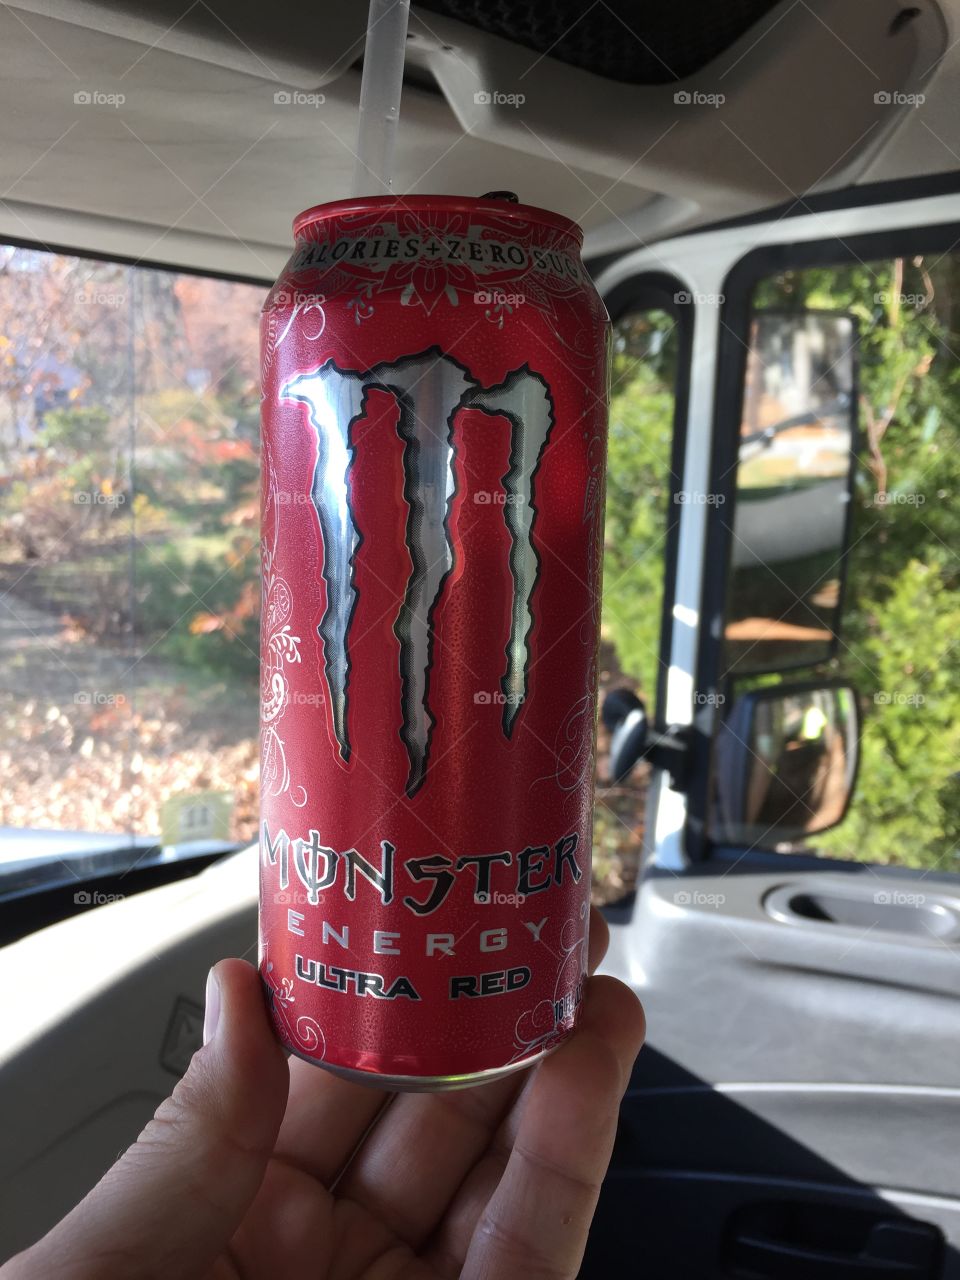 Need a little Monster for the Work Day